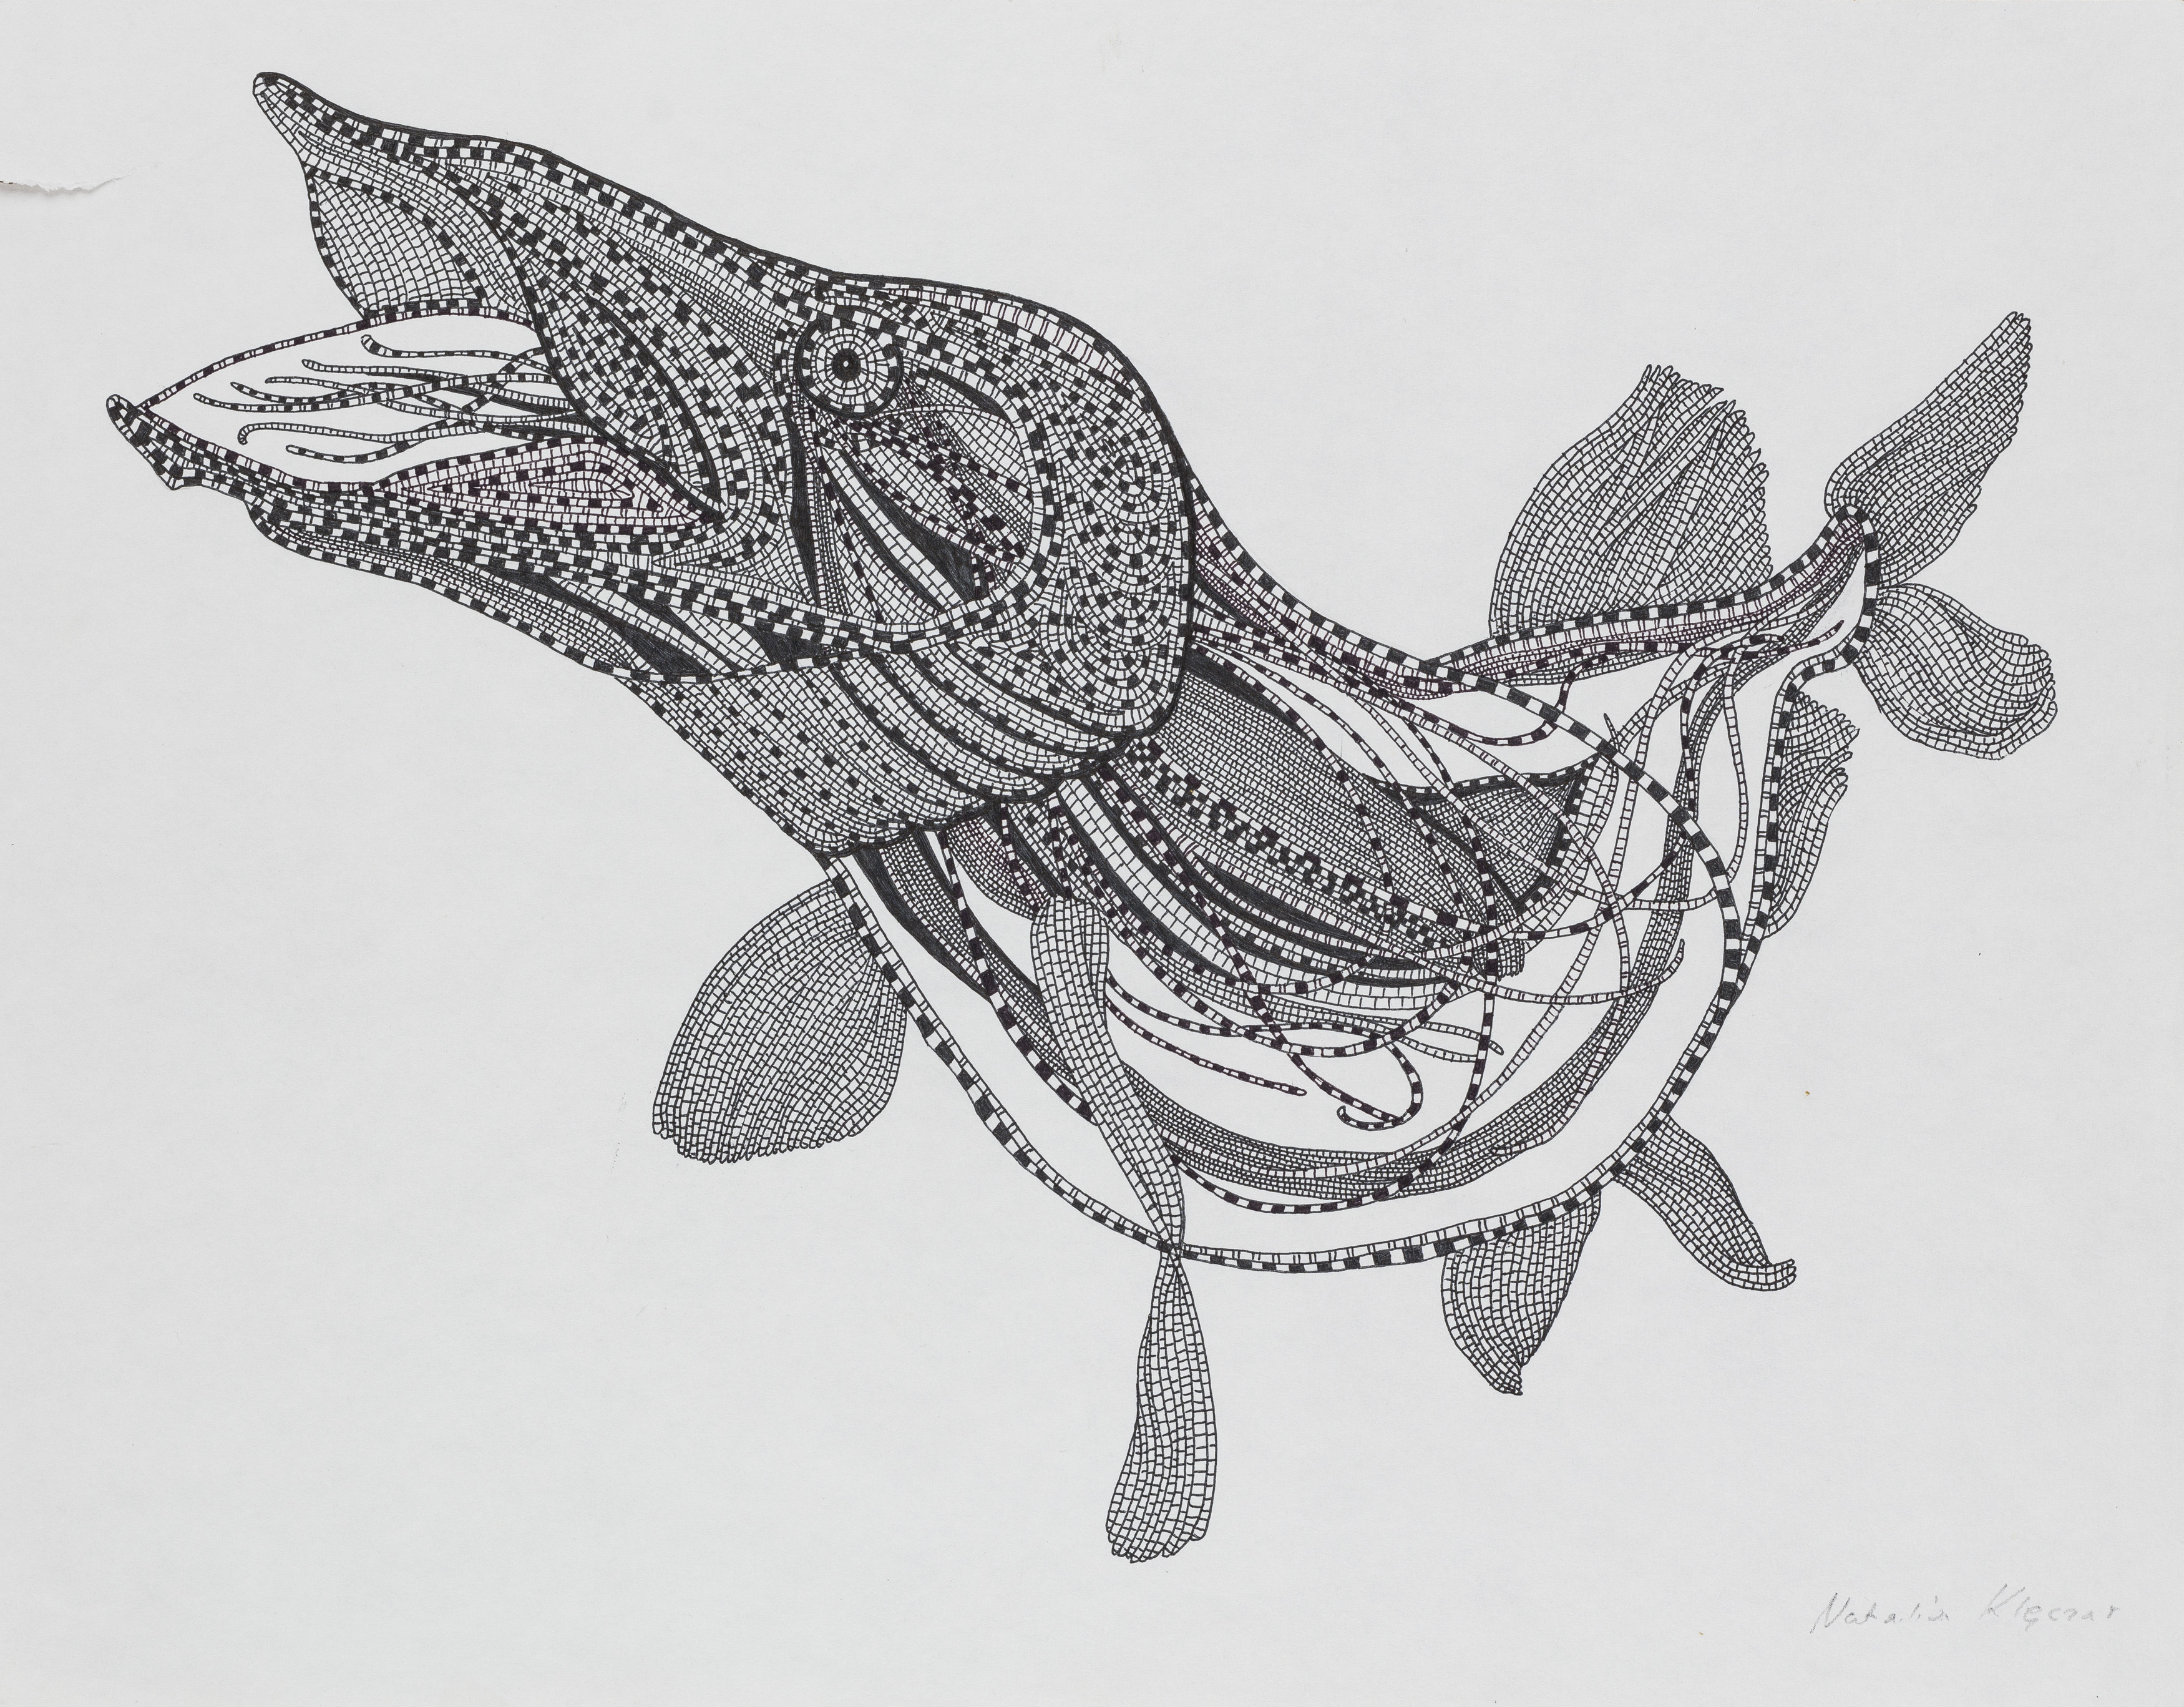 Untitled from the cycle Fish illustrations